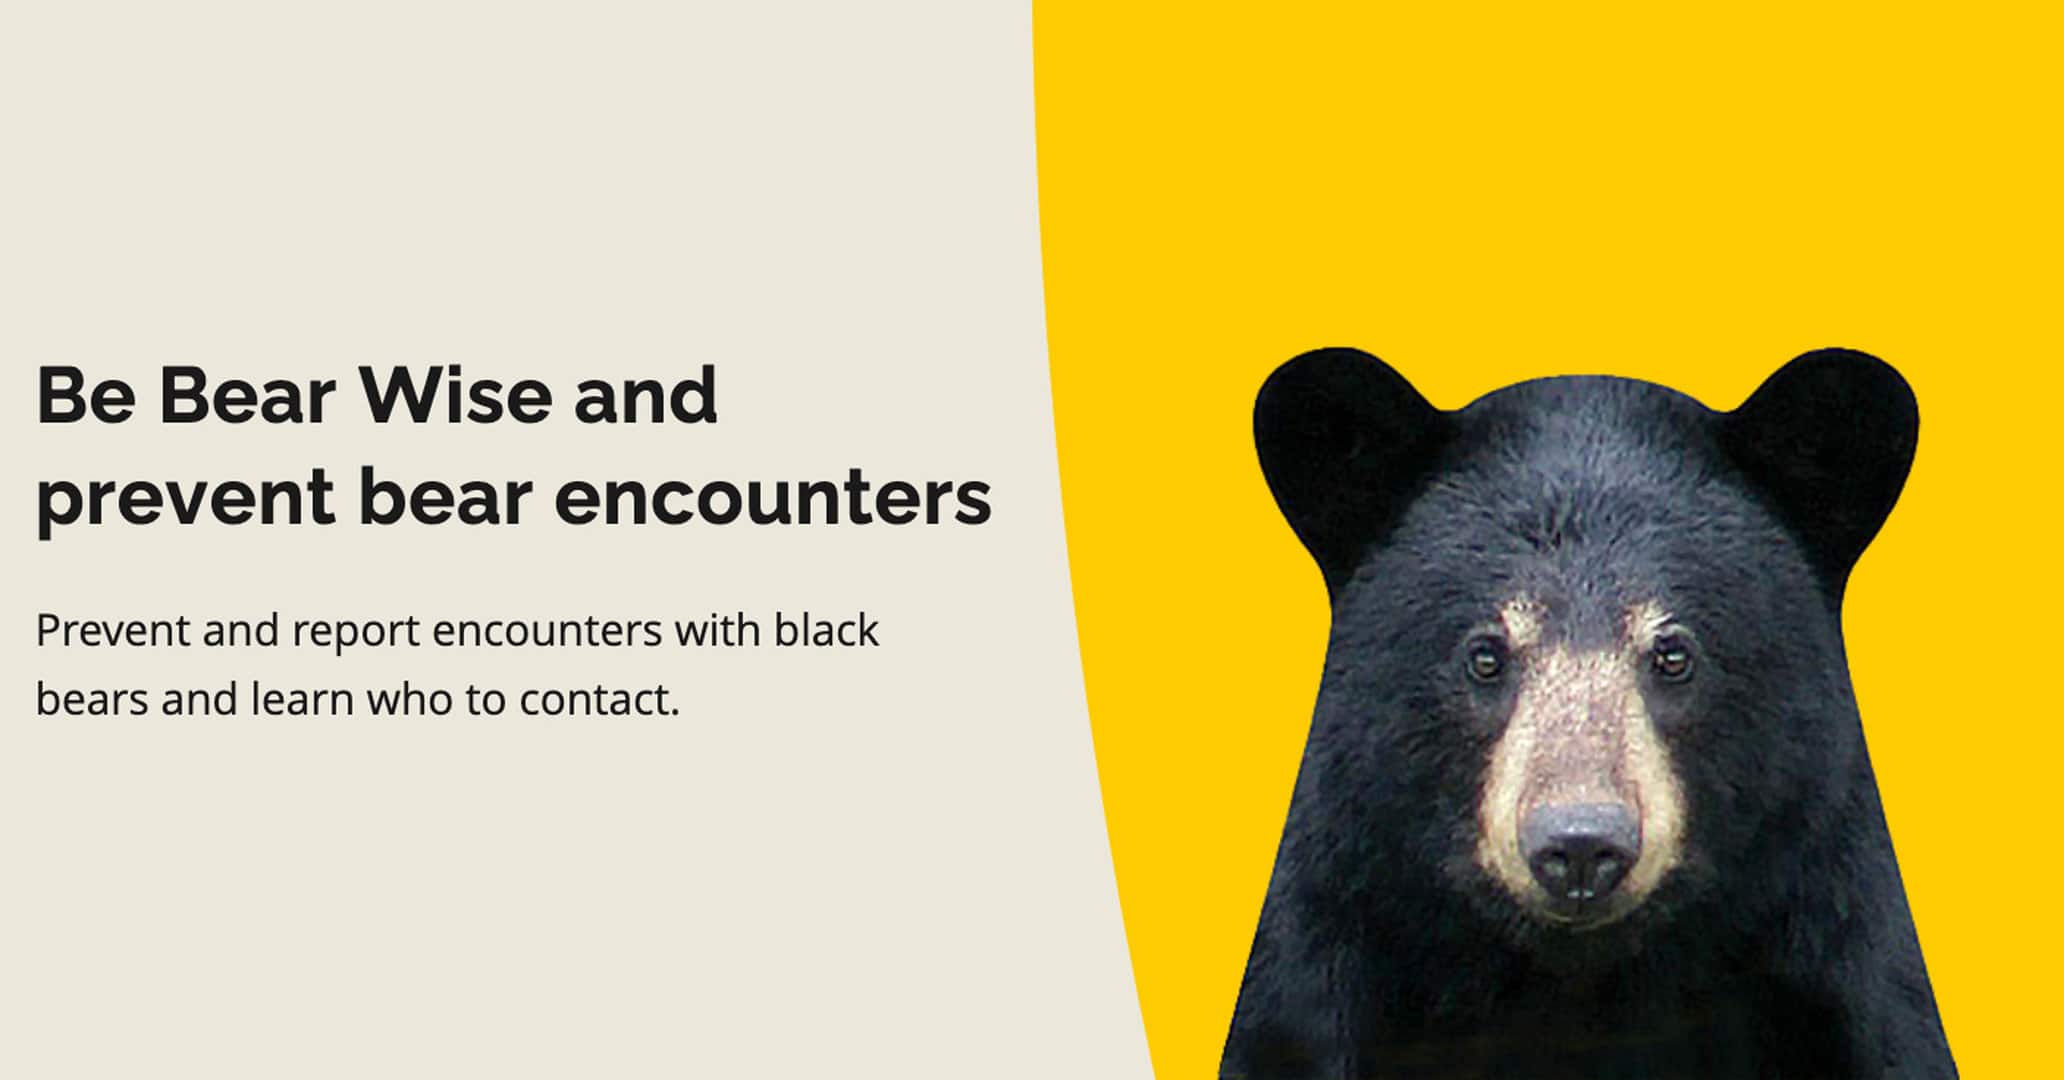 Be Bear Wise Graphic from the Government of Ontario